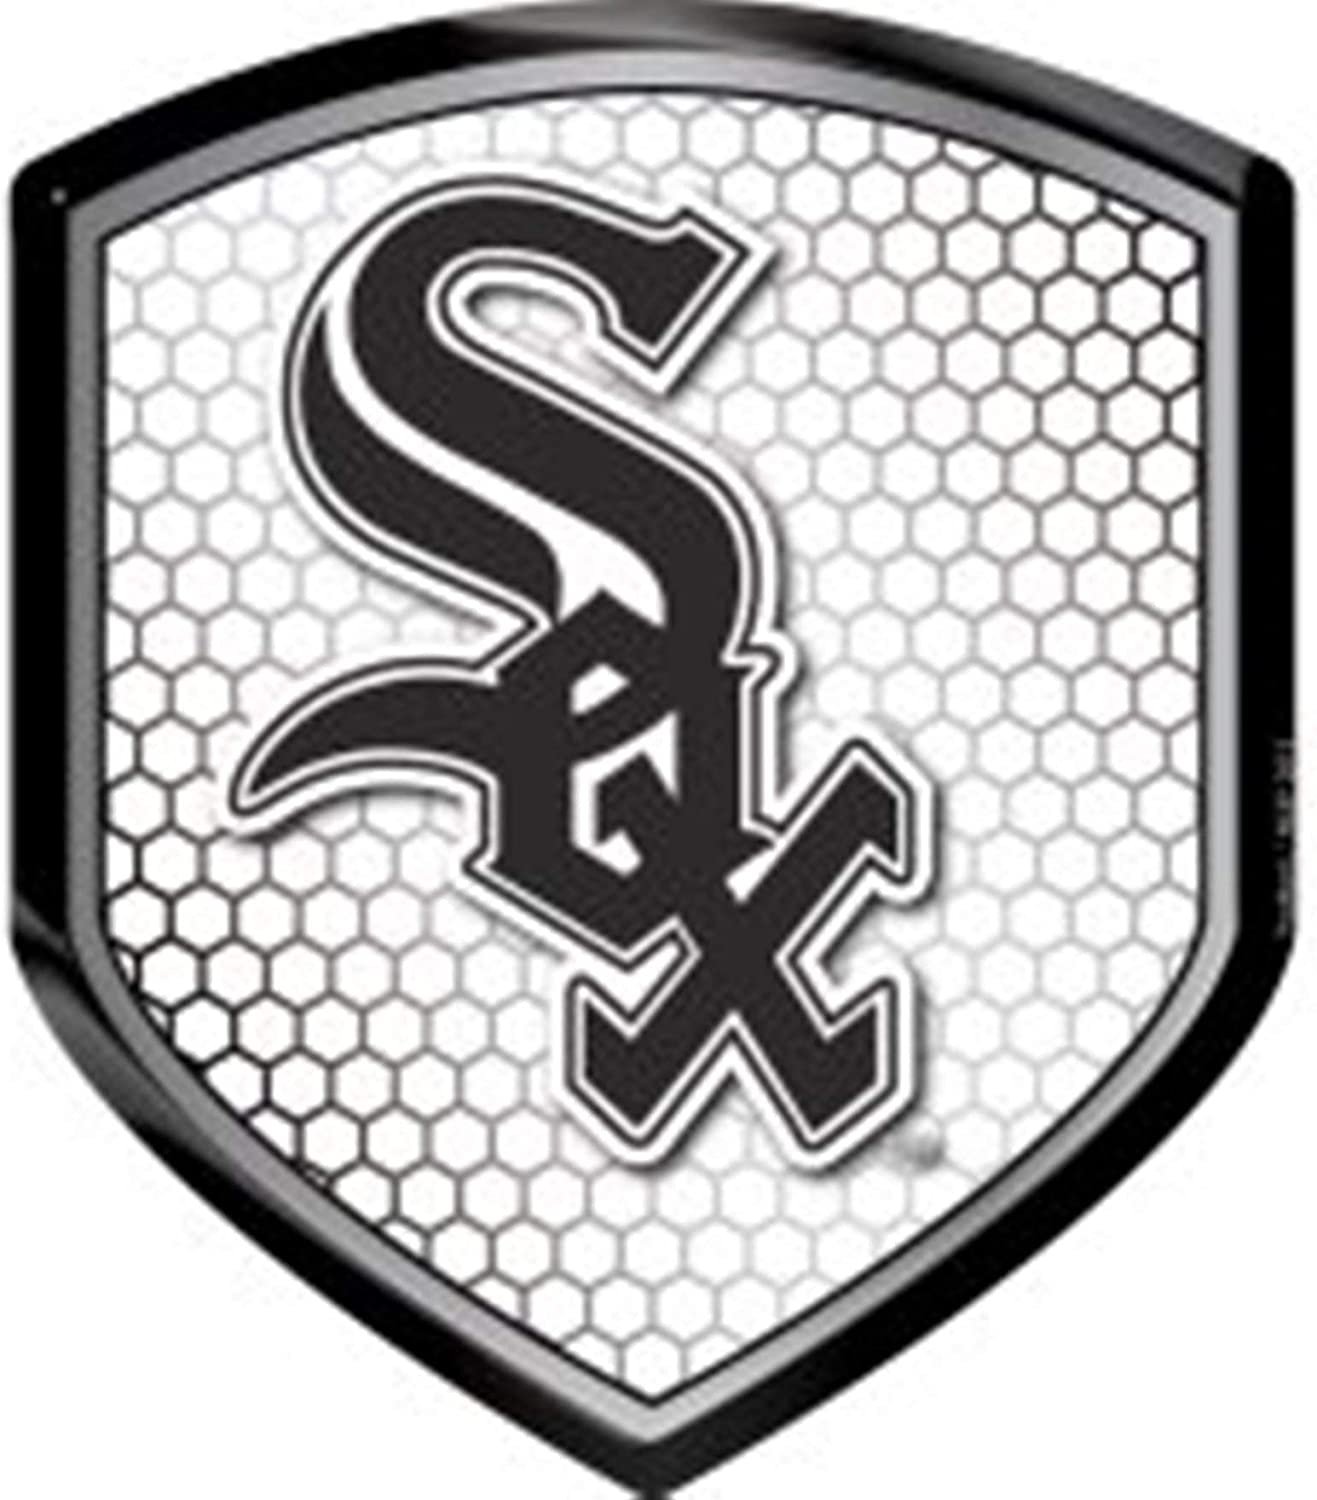 Chicago White Sox High Intensity Reflector, Shield Shape, Raised Decal Sticker, 2.5x3.5 Inch, Home or Auto, Full Adhesive Backing